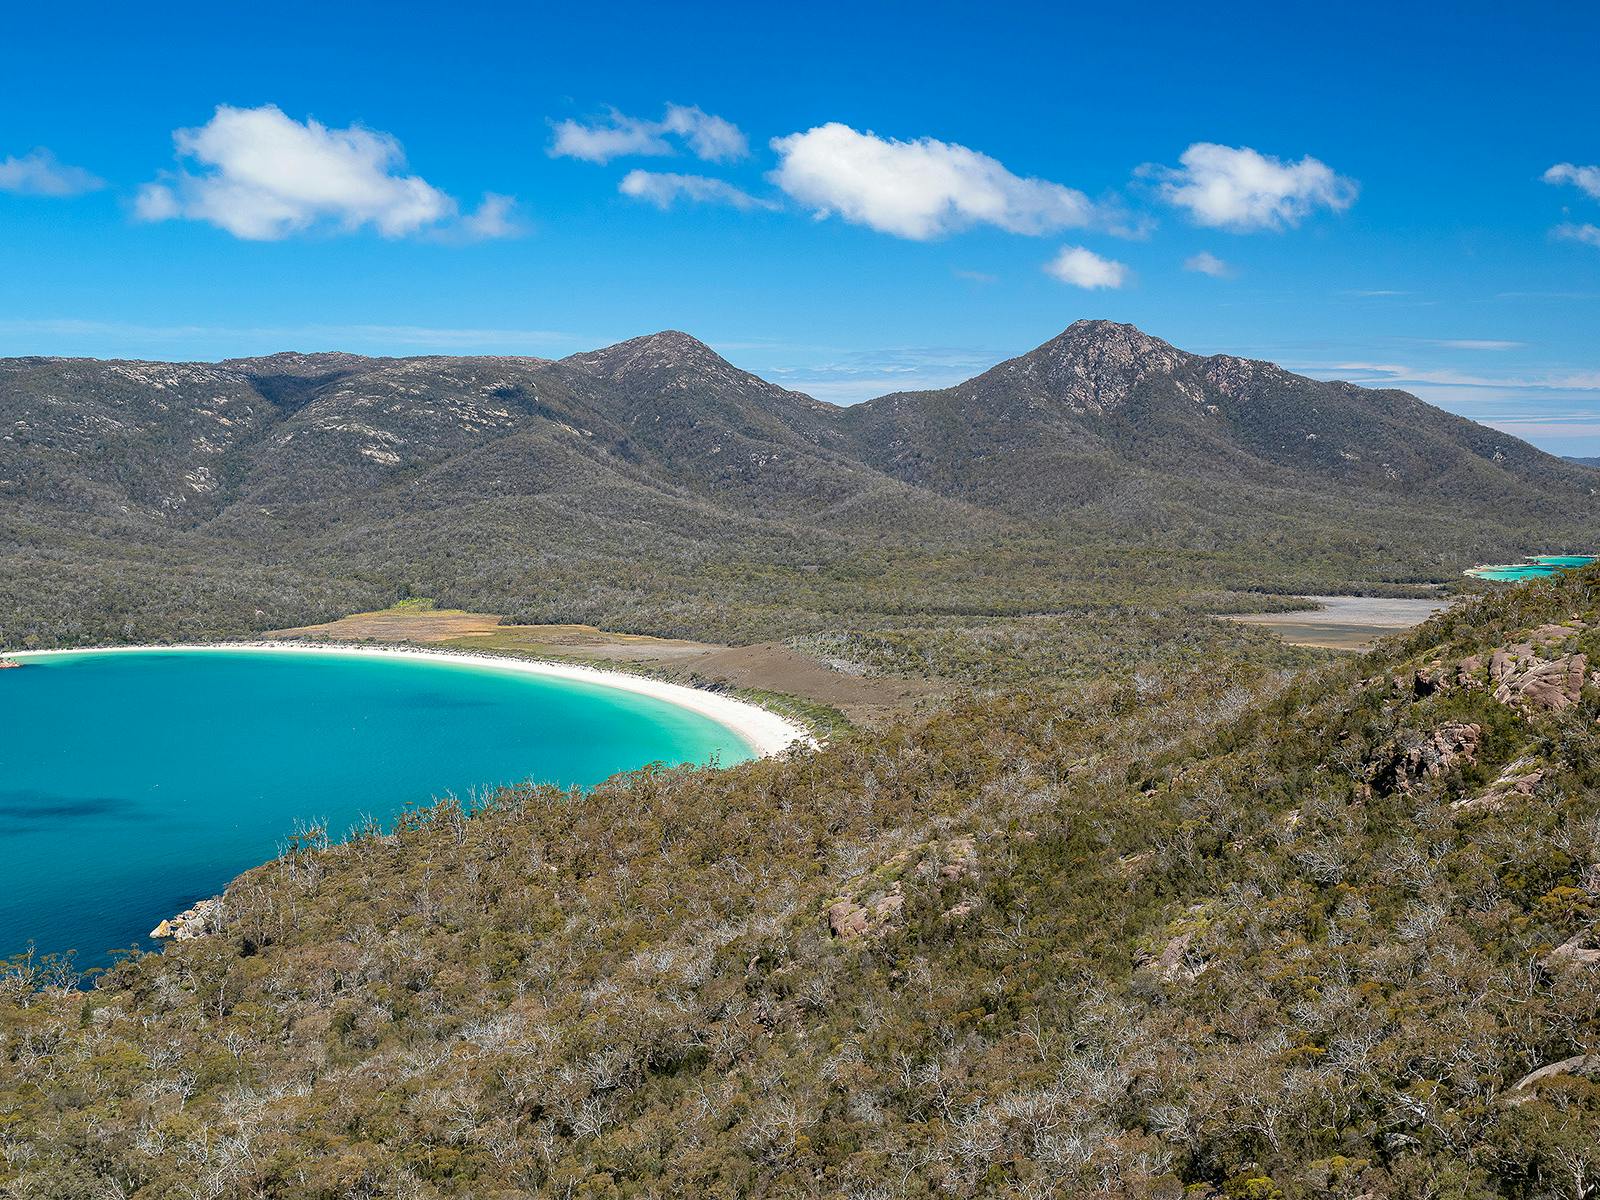 Wineglass Bay from the lookout